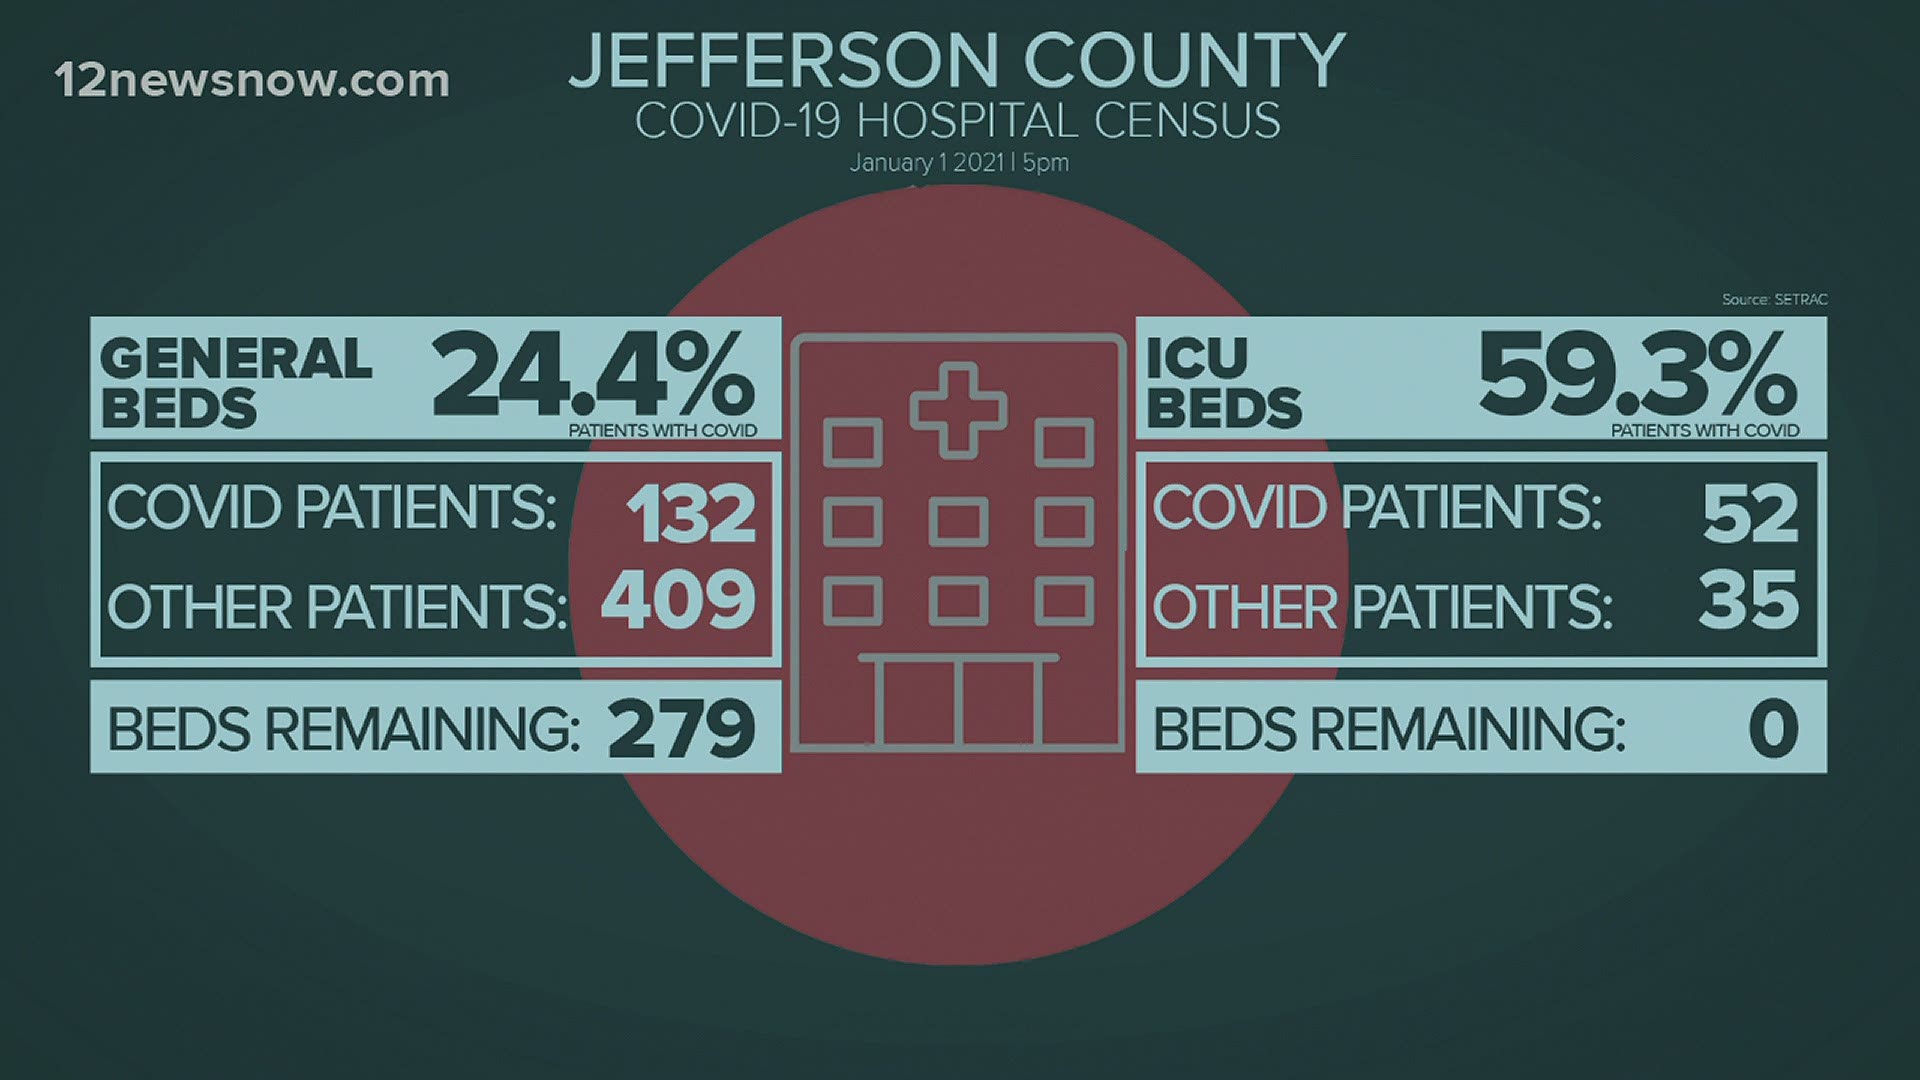 ICU beds in Jefferson County are at full capacity, with almost 60 percent of those patients having COVID-19.